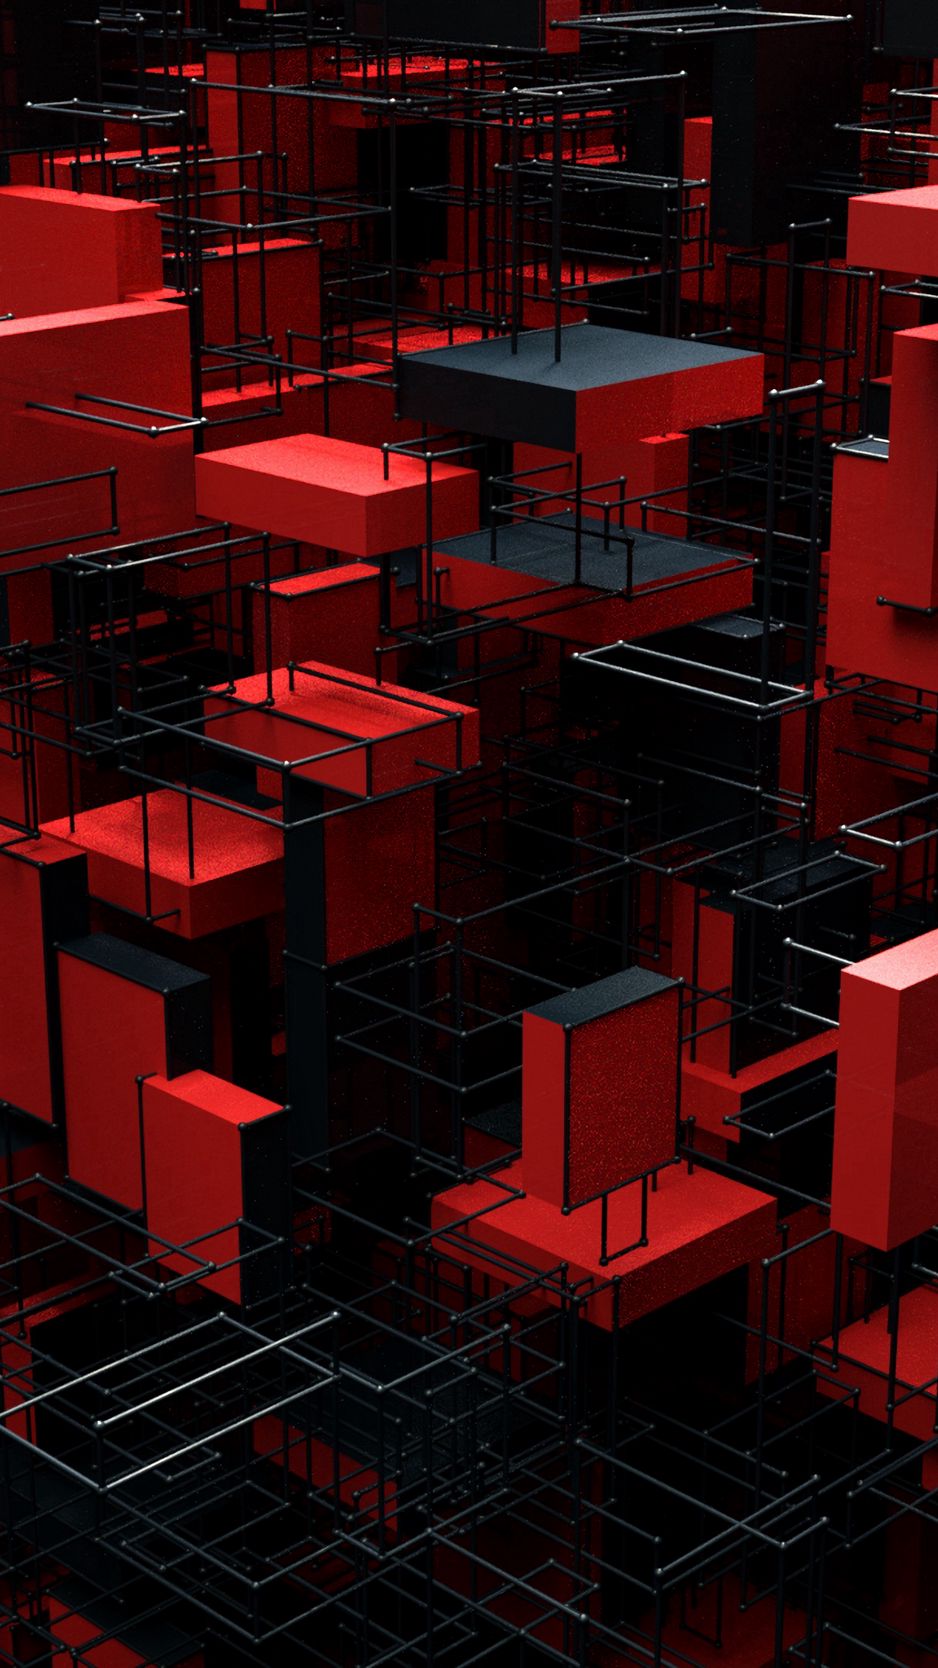 Download wallpaper 938x1668 structure, blocks, 3d, red, black iphone  8/7/6s/6 for parallax hd background